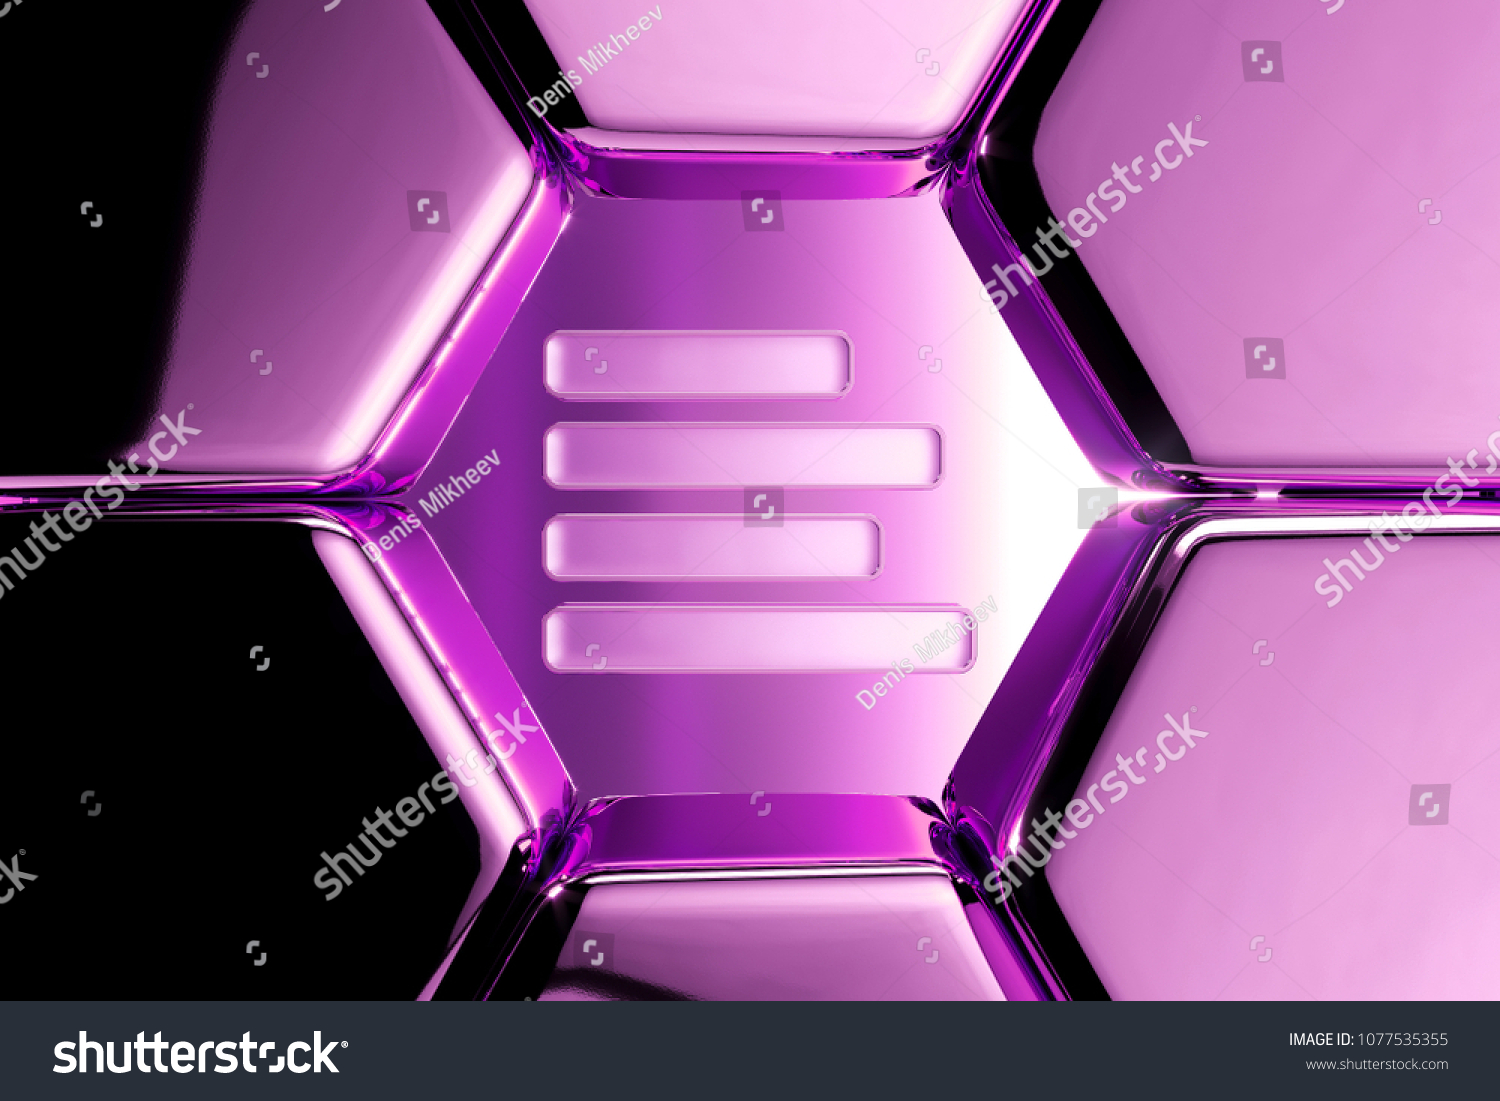 Metallic Magenta Align Text to Left Icon in the Luxury Honeycomb. 3D Illustration of Magenta Align, Alignment, Direction, Left, Page, Position Icons on Magenta Geometric Hexagon Pattern. #1077535355